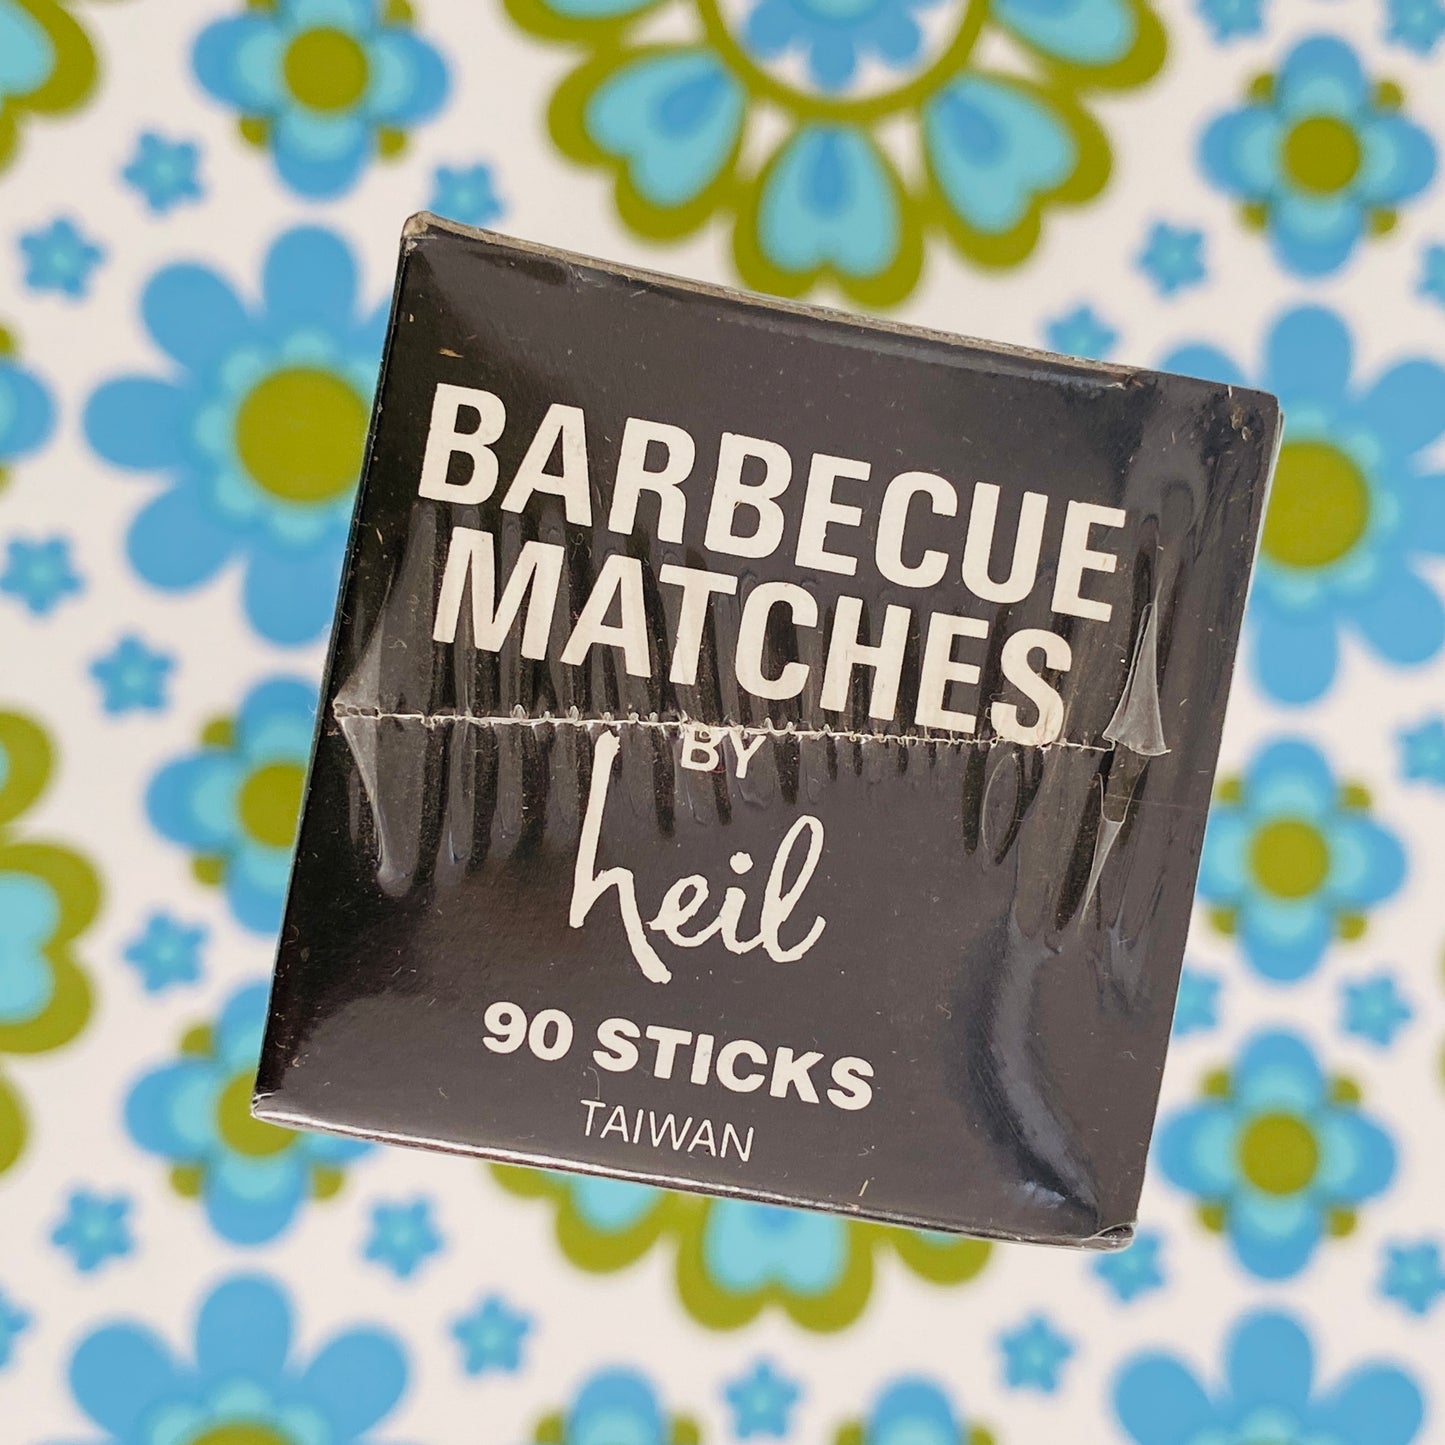 Collectable Vintage Boxed Matches By Heil 90 Sticks